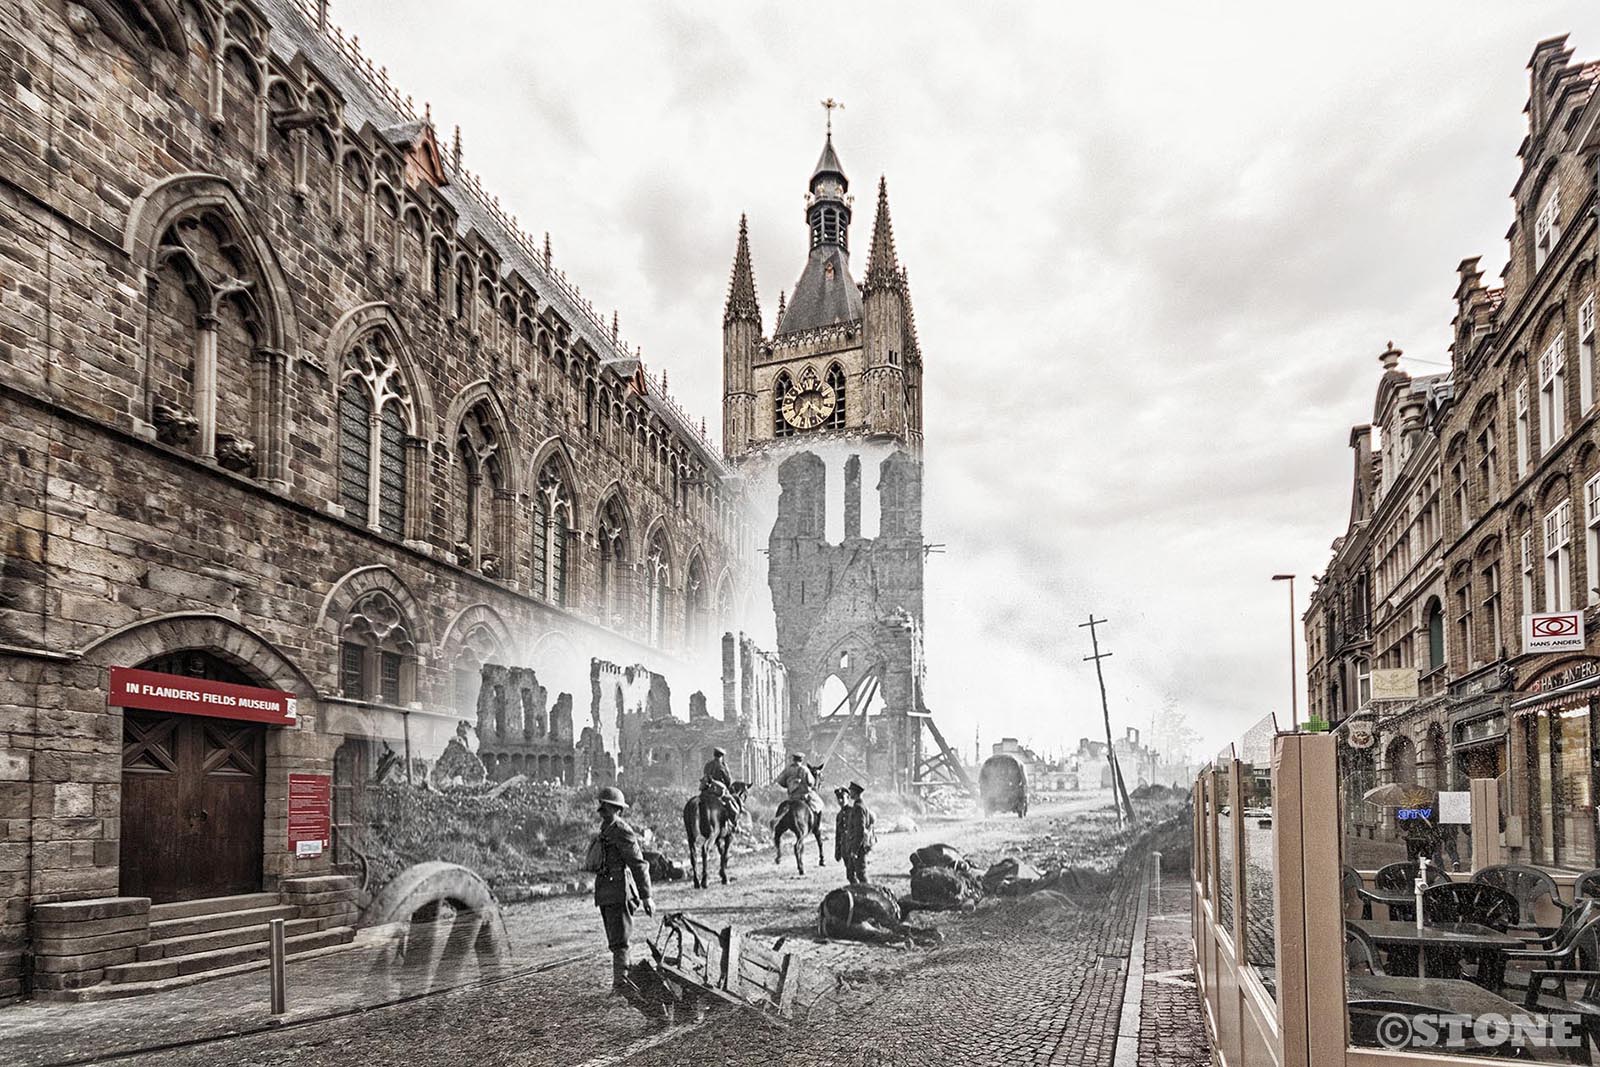 Ghosts: Ypres in the Great War